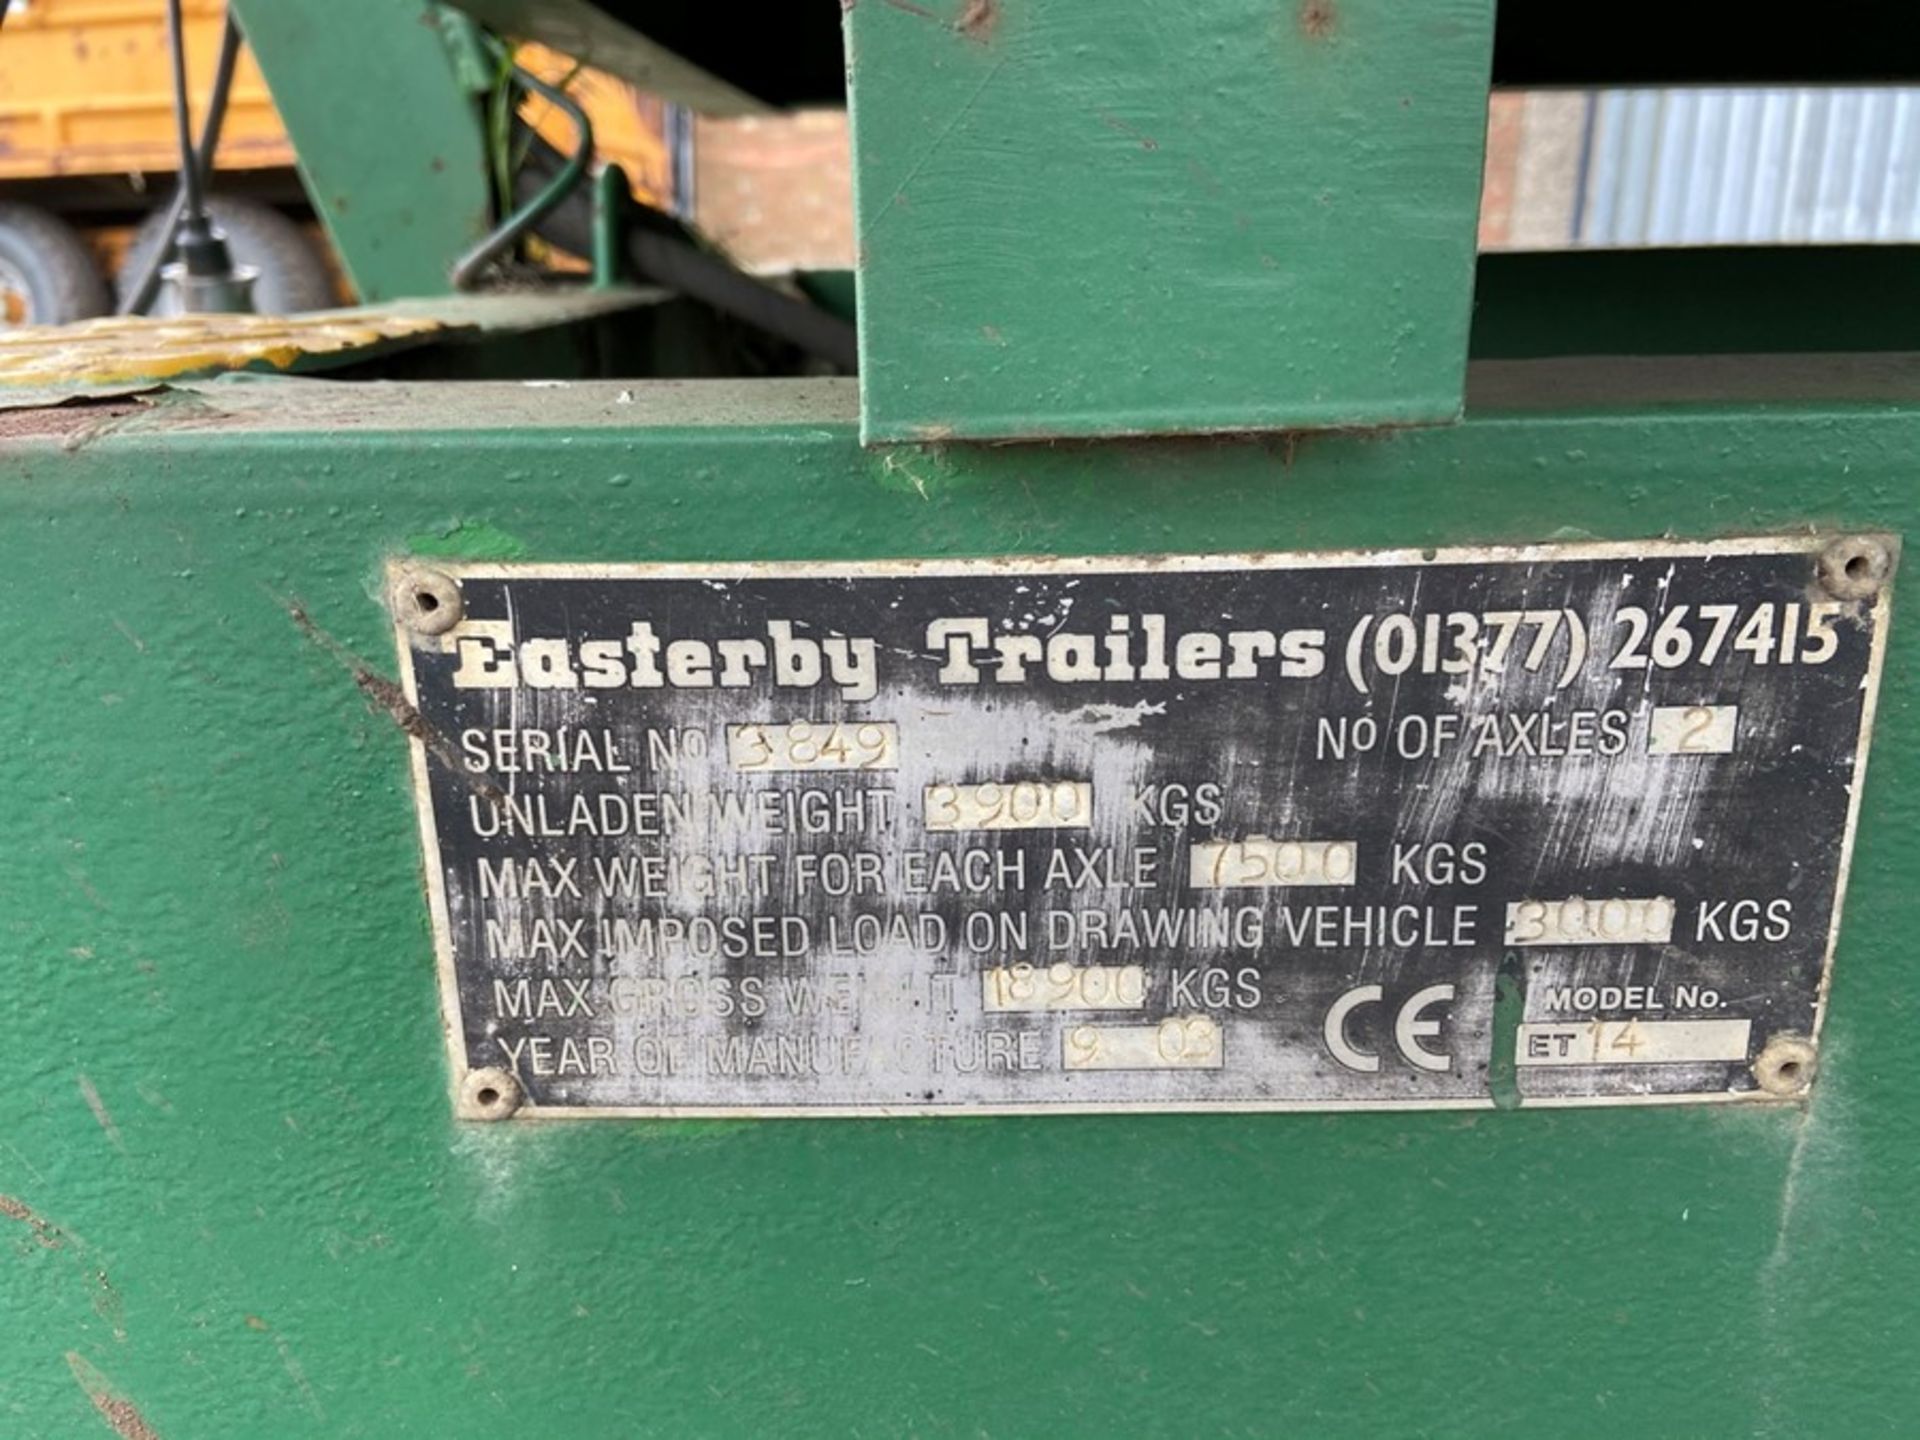 2008 Eastbury twin axle 14 ton trailer ET14, serial number 3849 - Image 2 of 11